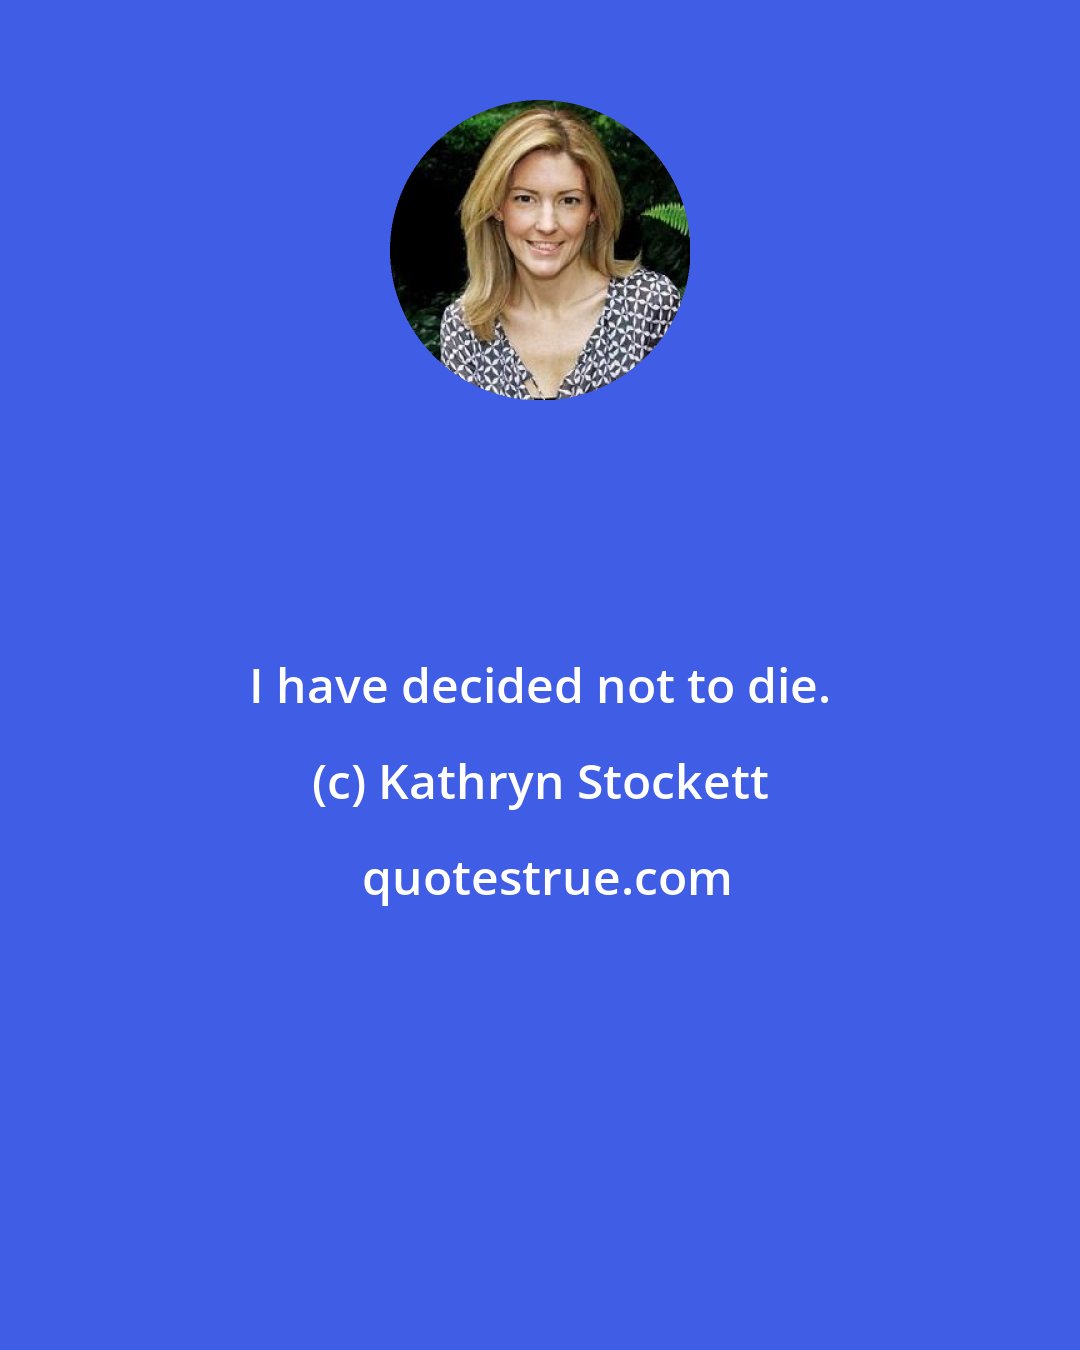 Kathryn Stockett: I have decided not to die.